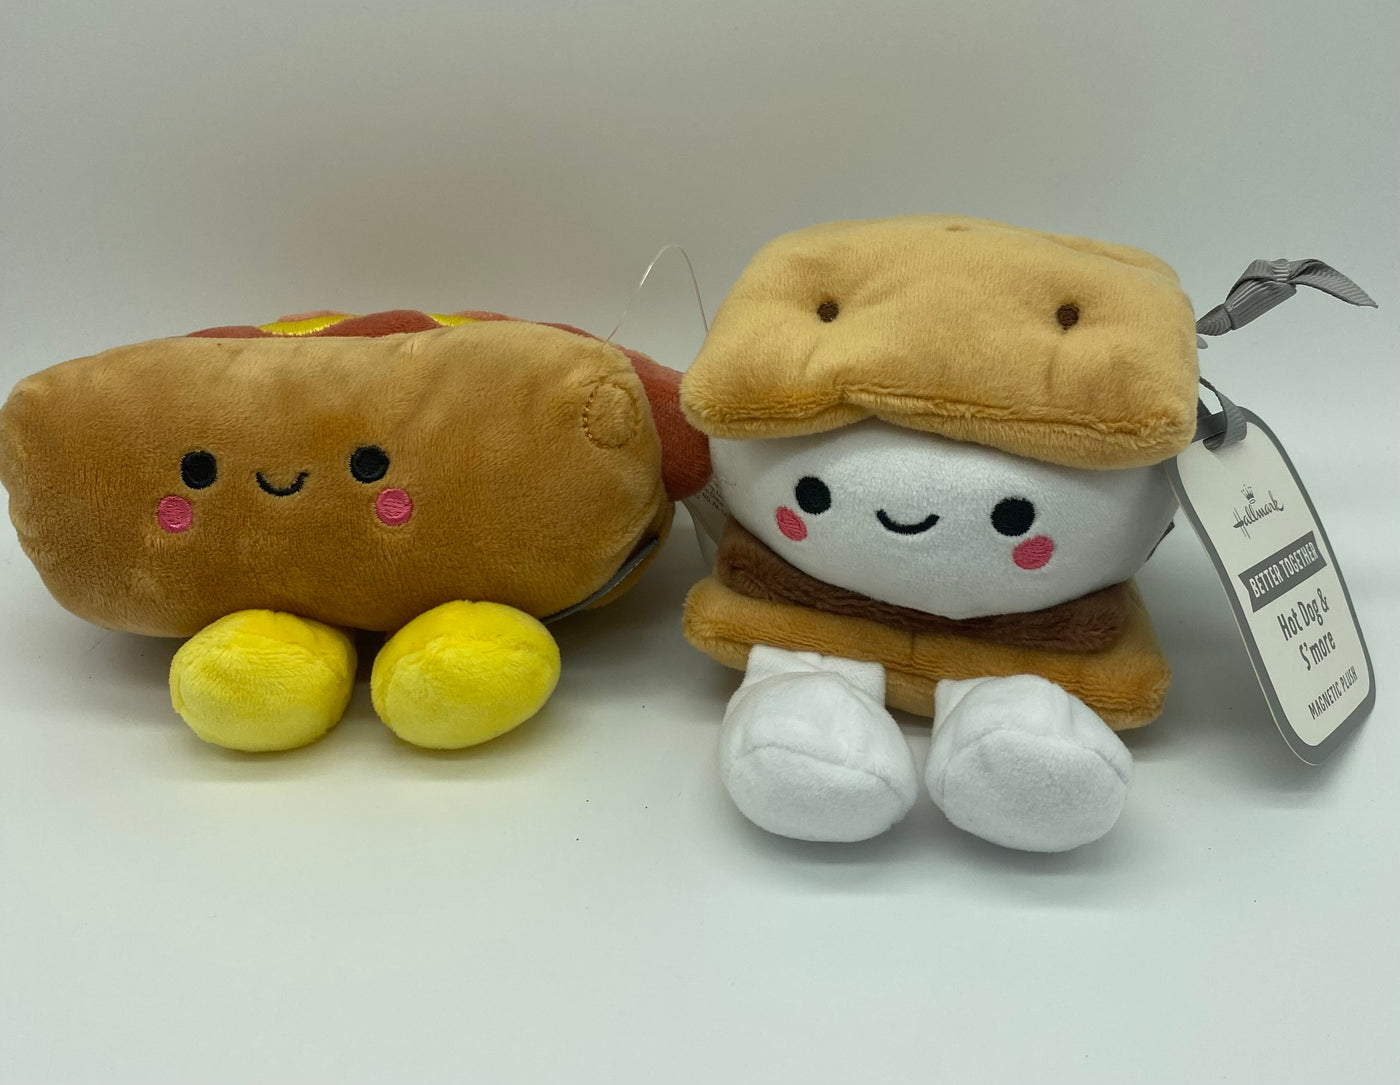 Hallmark Better Together Hot Dog and S'more Magnetic Plush New with Tag